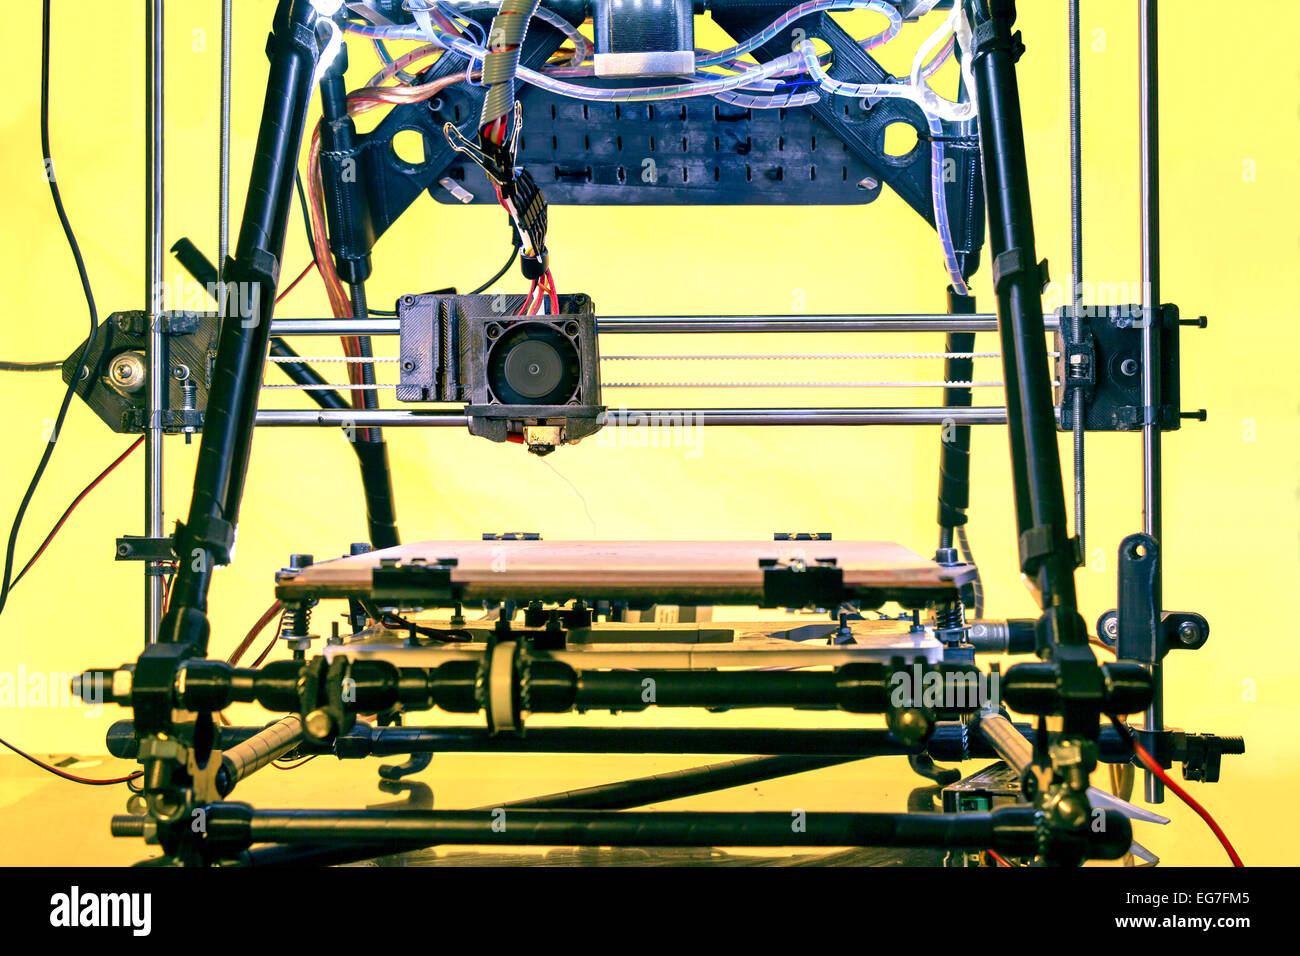 Open Source Three dimensional printer, Printing with Plastic Wire Stock Photo